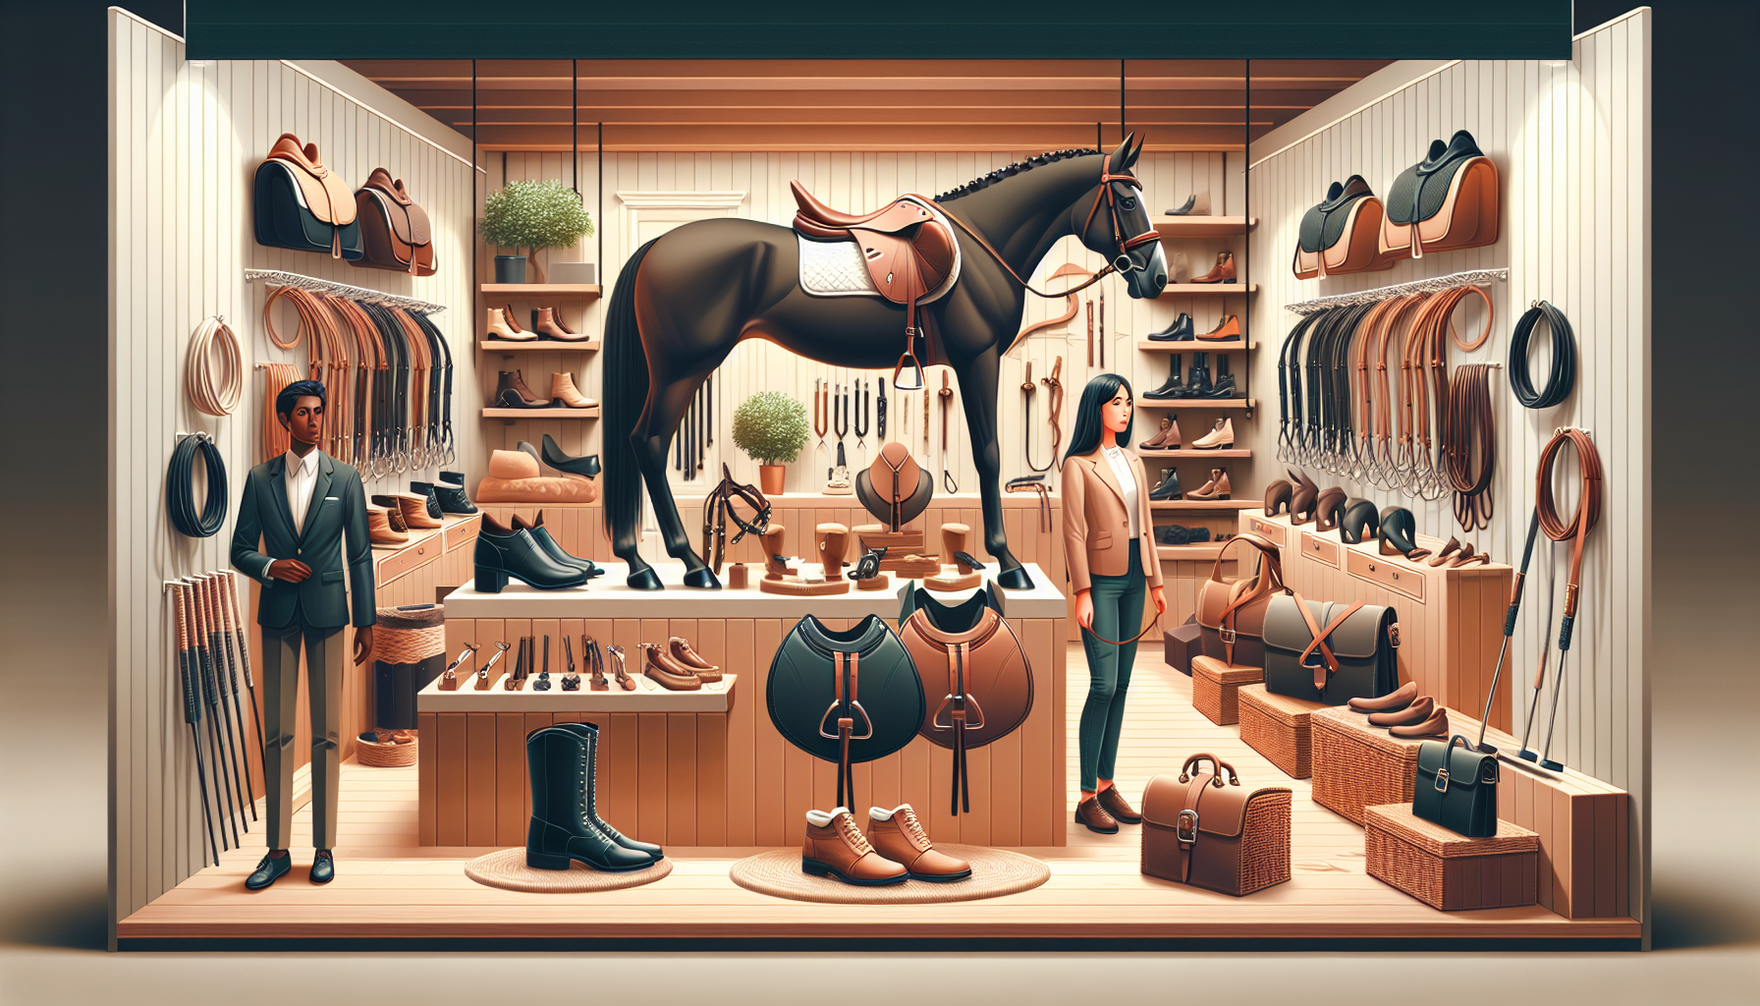 A well-stocked equestrian store showcasing top-notch horse riding gear. The scene includes highest quality riding boots, dressage saddles, horse bridles, and horse grooming tools. Imagine the arrangem